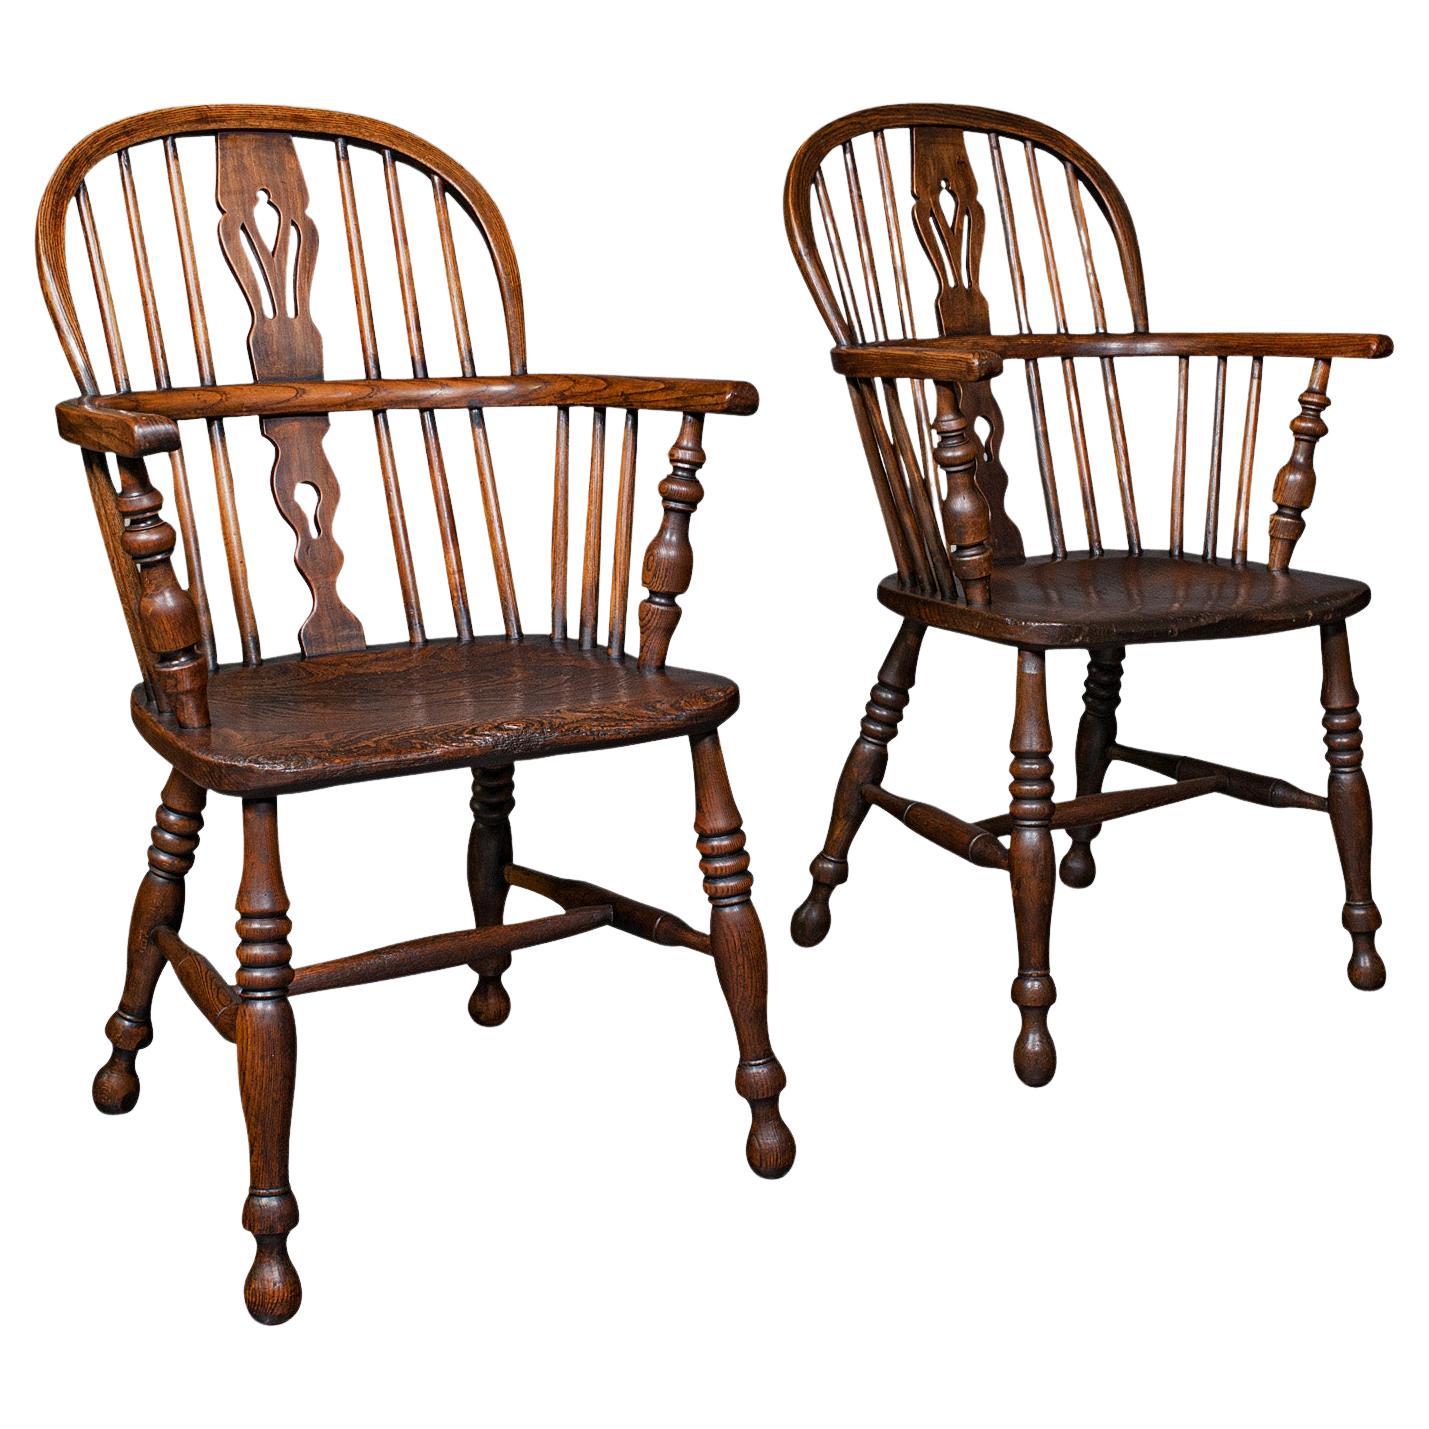 Pair of Antique Windsor Chairs, English, Elm, Ash, Elbow, Armchair, Victorian